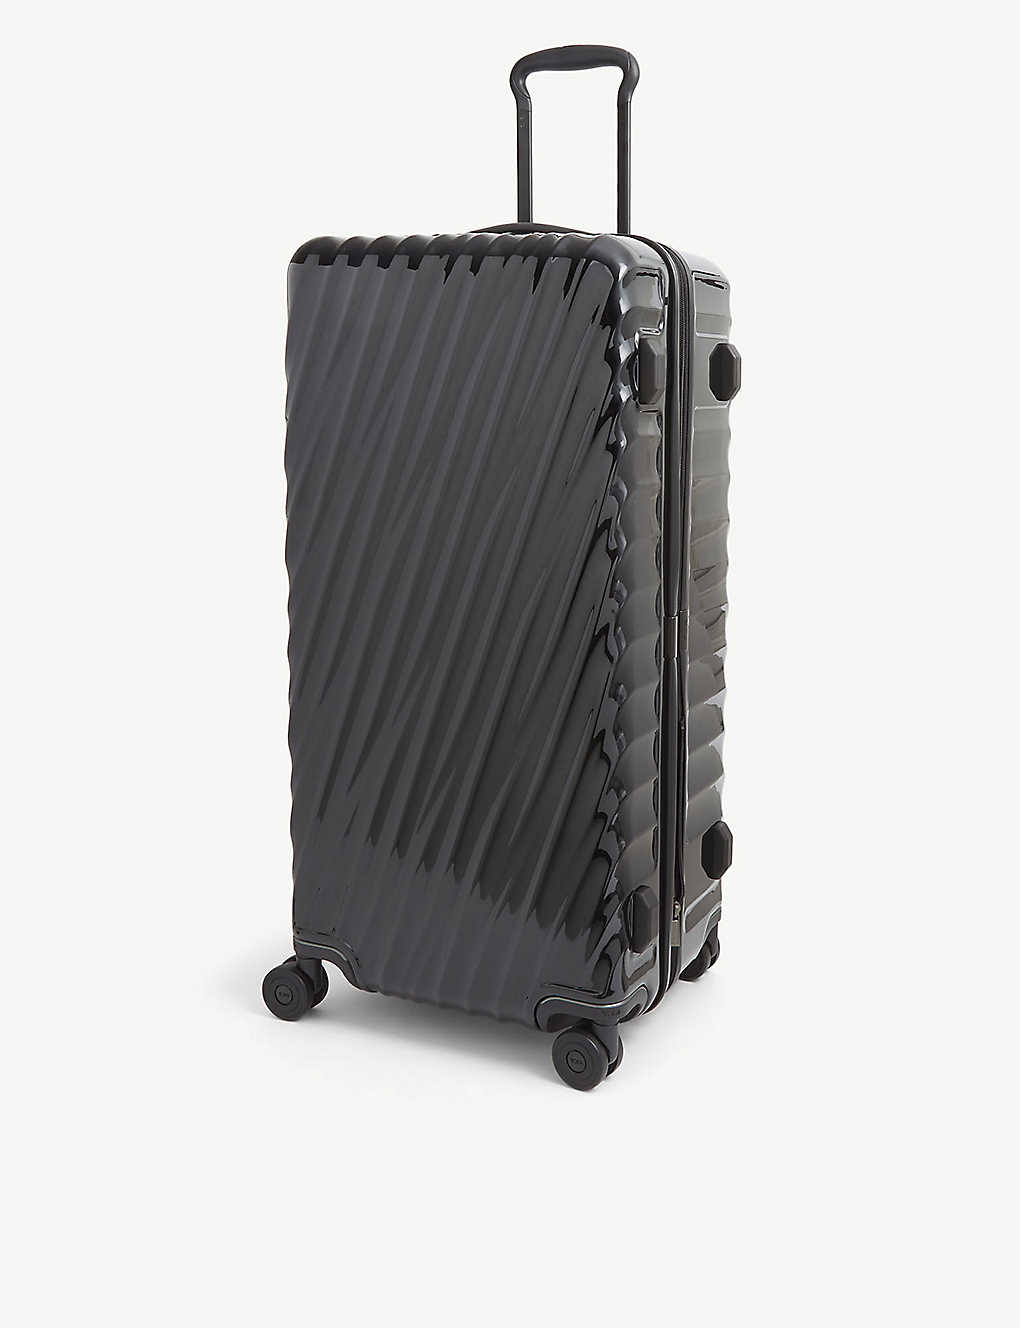 Tumi International Expandable 19 Degree Trunk Polycarbonate Suitcase In Black